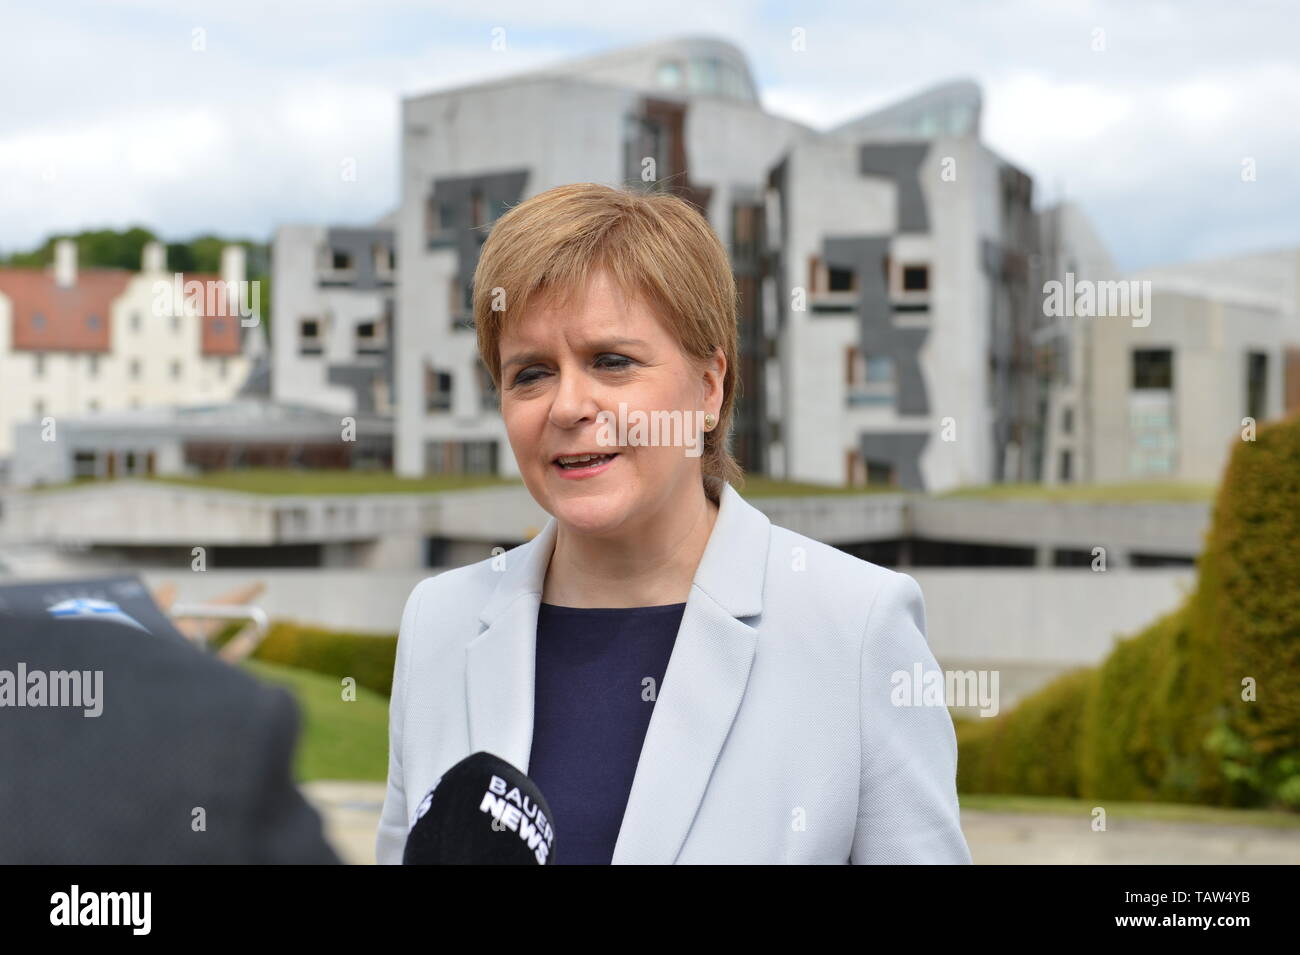 Edinburgh, UK. 28th May, 2019. SNP Leader Nicola Sturgeon welcomes the three newly elected SNP MEPs - Alyn Smith, Christian Allard and Aileen McLeod - following the party's emphatic victory in the European parliament elections. Ms Sturgeon said: “Scotland said no to Brexit in 2016. This emphatic result makes clear, we meant it. “These three first class SNP MEPs will work tirelessly to keep Scotland in Europe, stop Brexit and make Scotland's voice heard at every turn. Credit: Colin Fisher/Alamy Live News Stock Photo